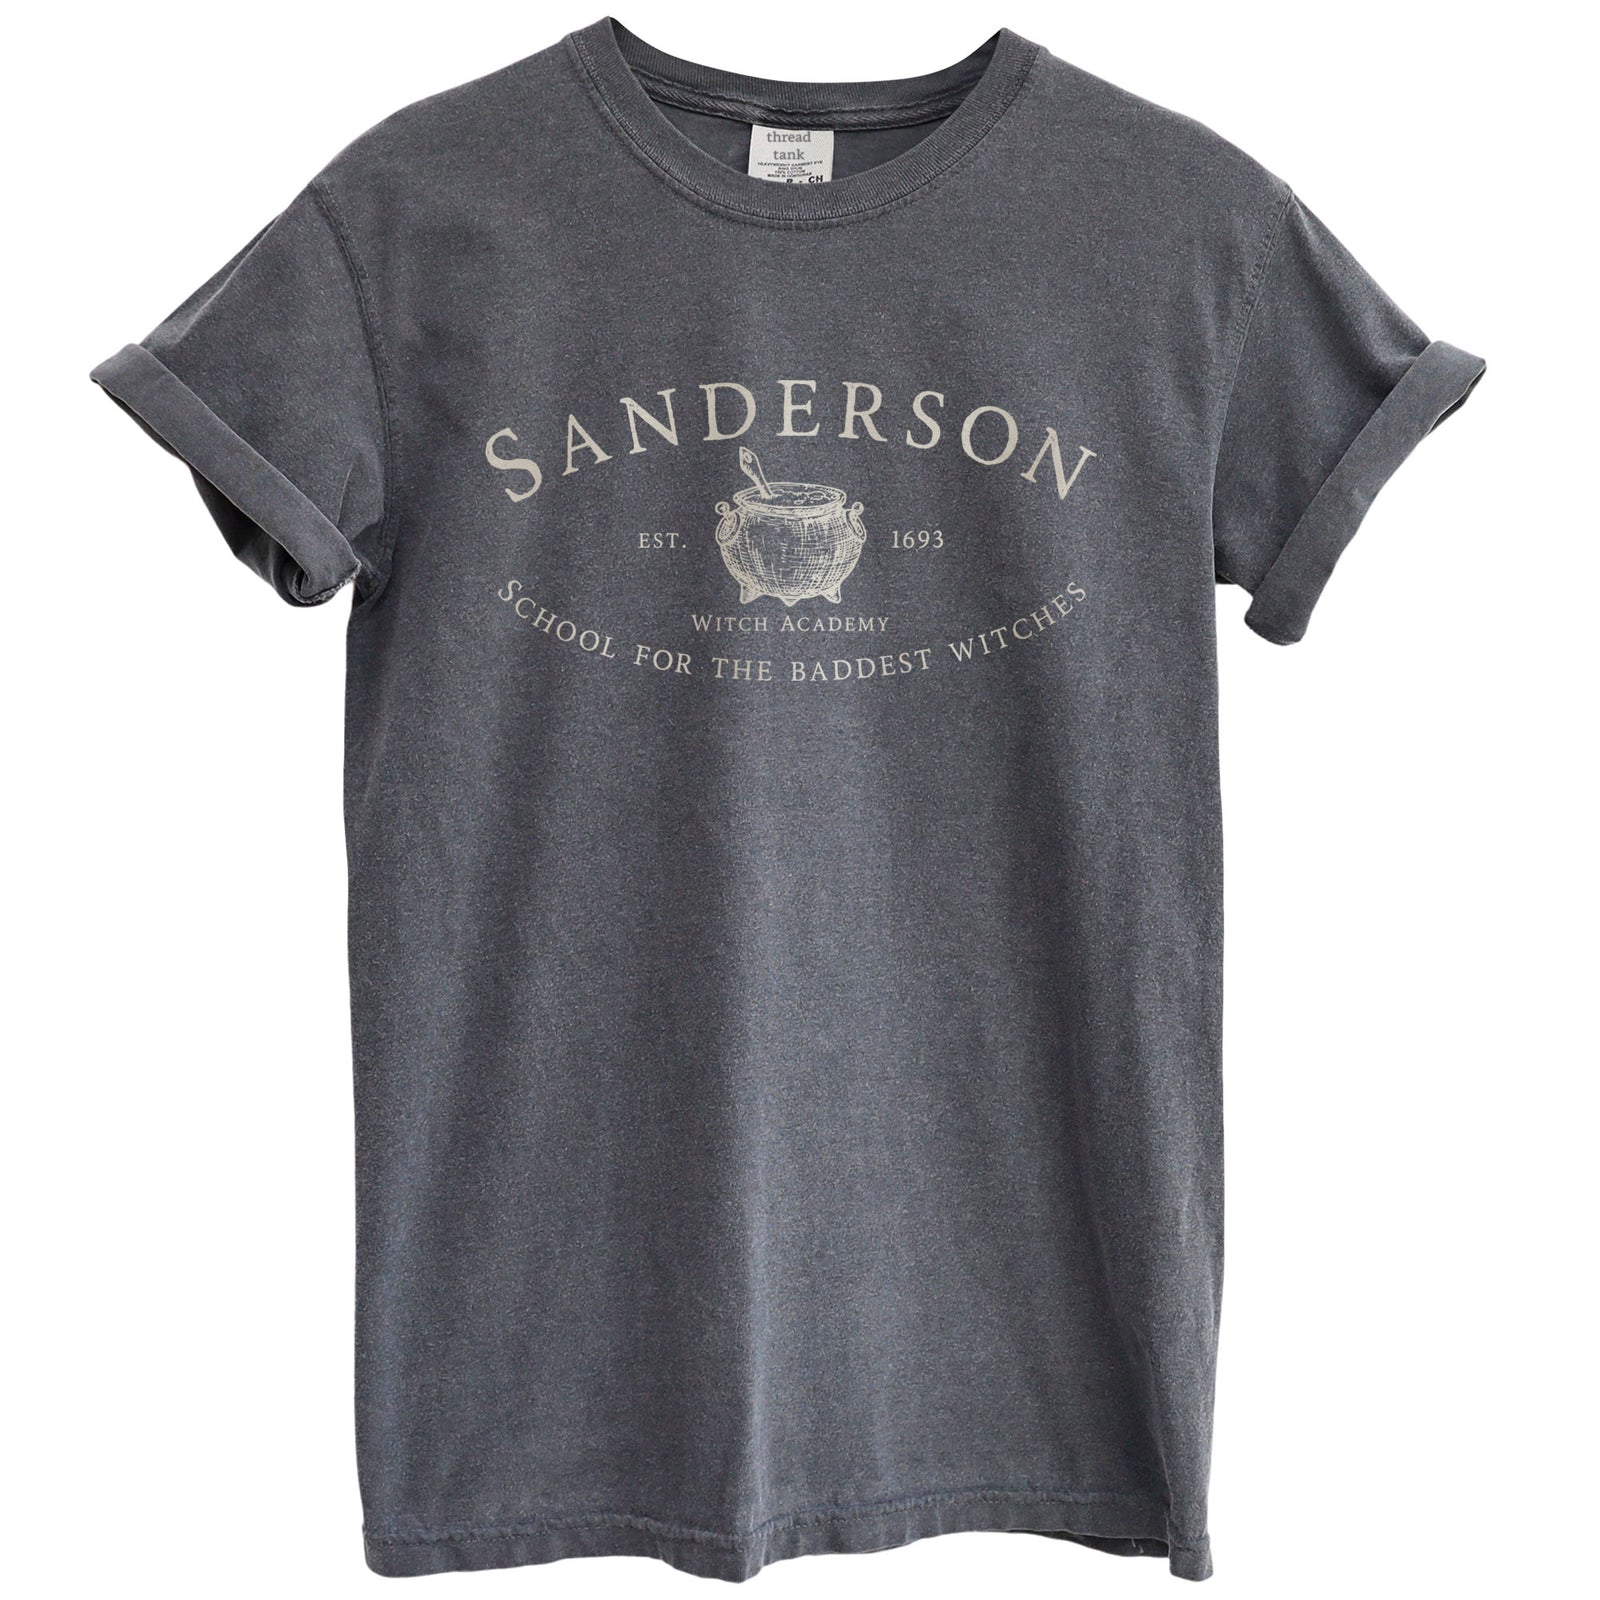 sanderson witch academy oversized garment dyed shirt